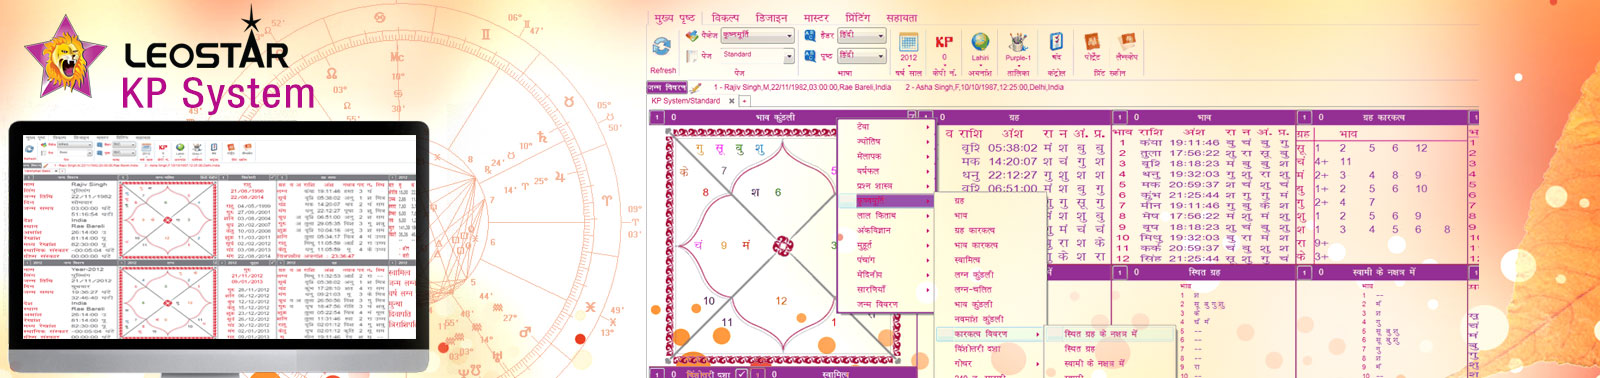 kp astrology software free download in bengali